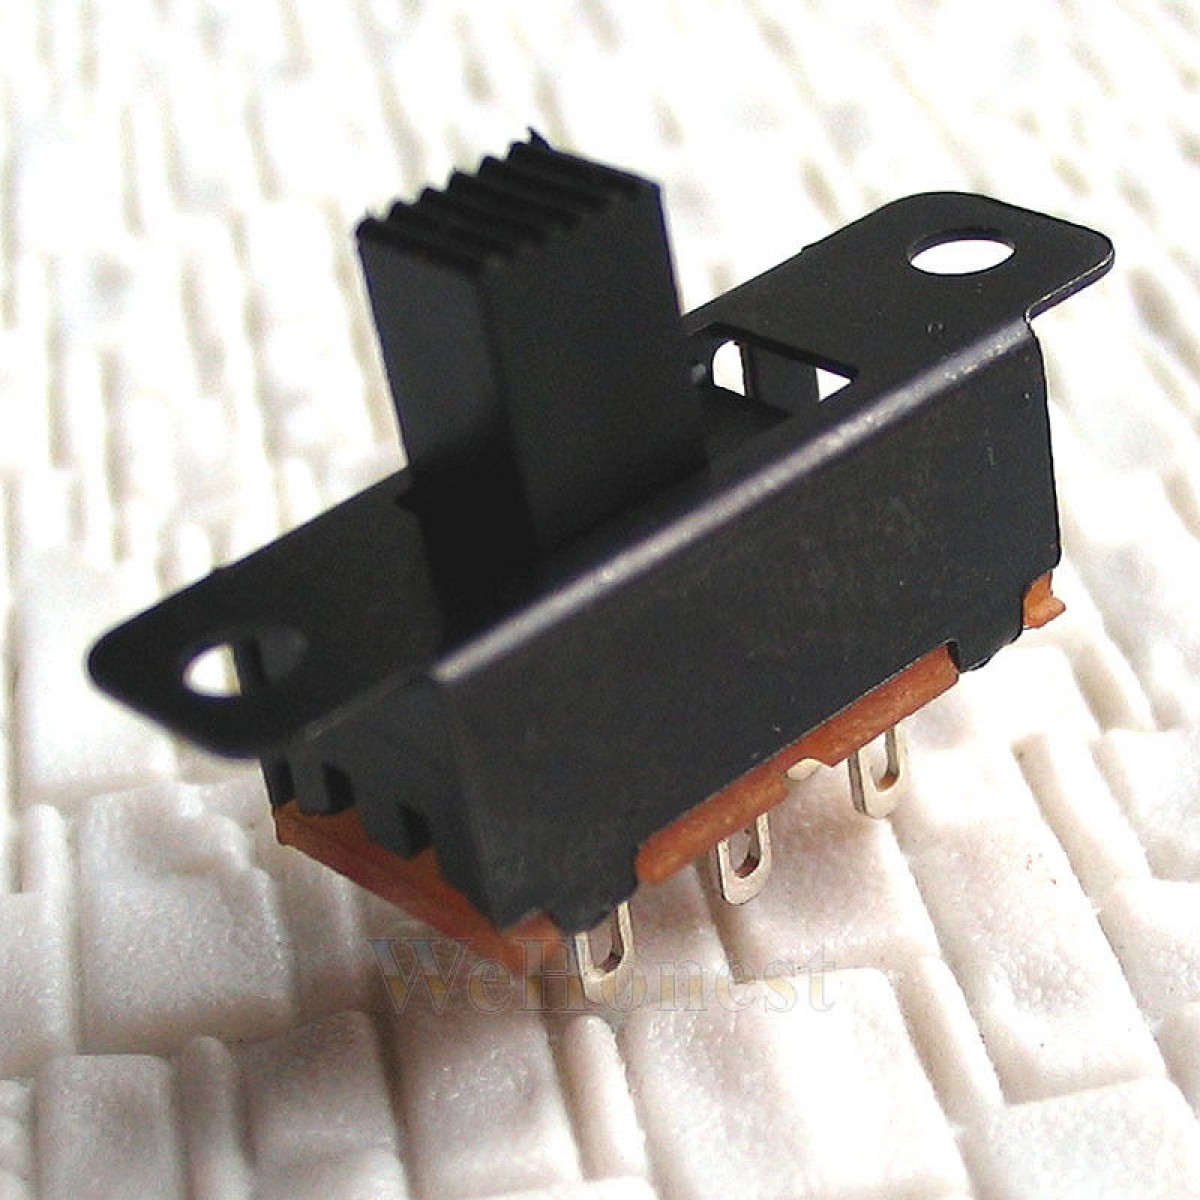        10  x Slide  Switch  DPDT  On-Off-On  controller  (WeHonest)